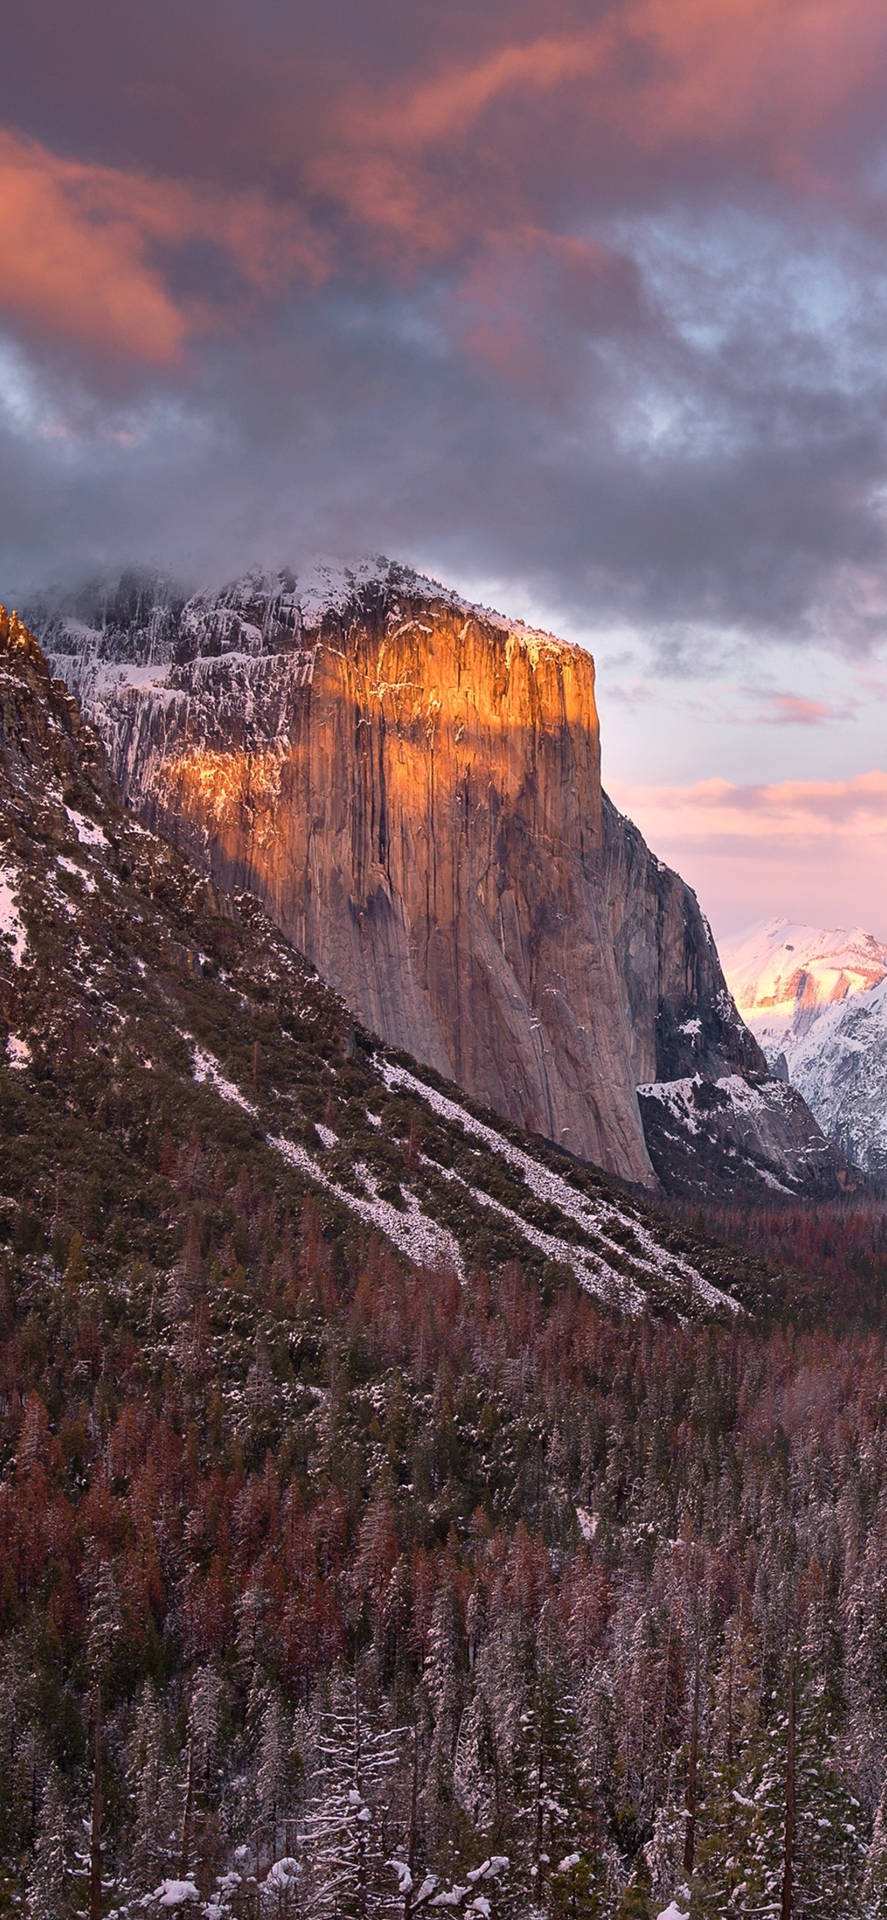 A beautiful view of Yosemite National Park seen through the lens of an Iphone Wallpaper